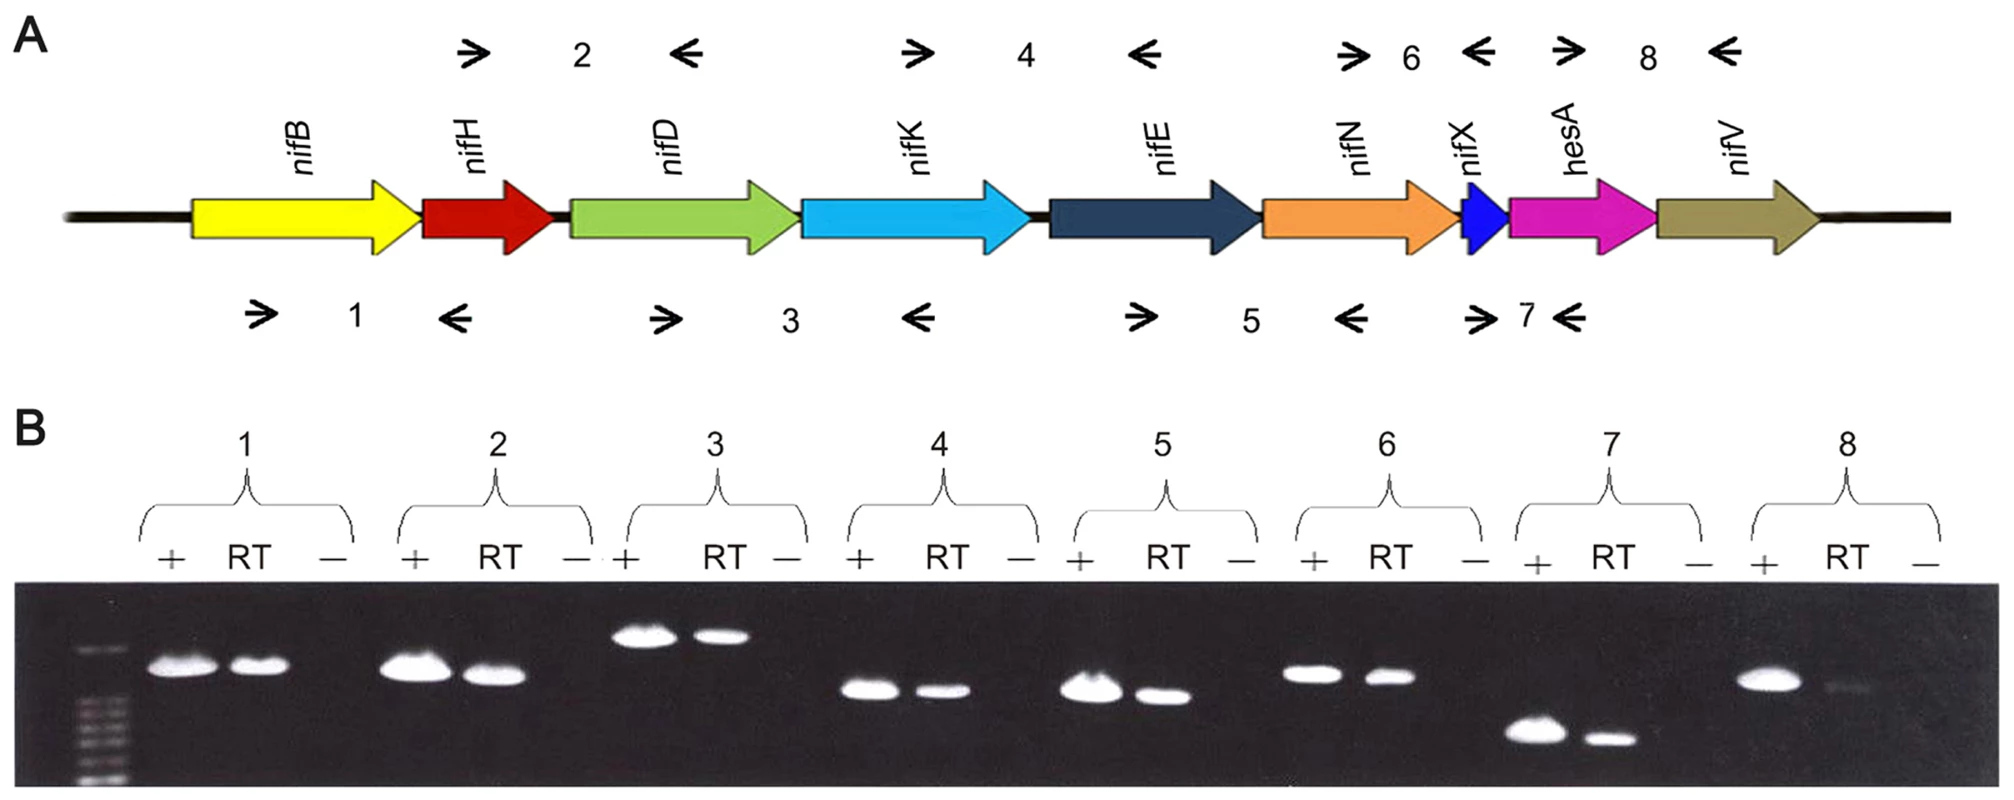 The <i>nif</i> genes of <i>Paenibacillus</i> sp. WLY78 are organized in an operon as determined by RT-PCR.